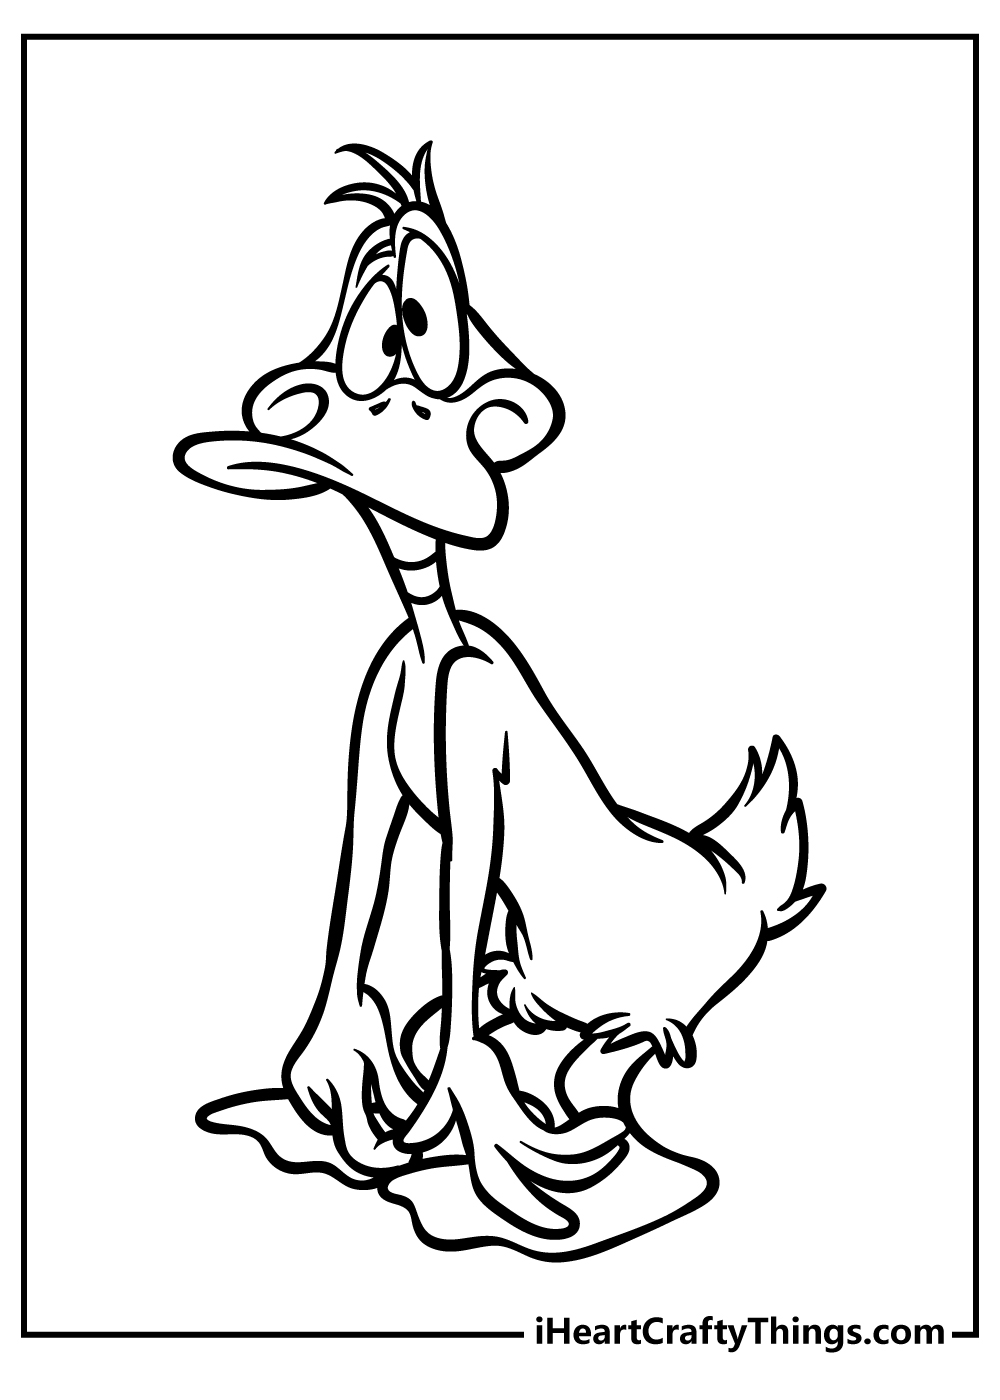 Looney Tunes Coloring Book for adults free download